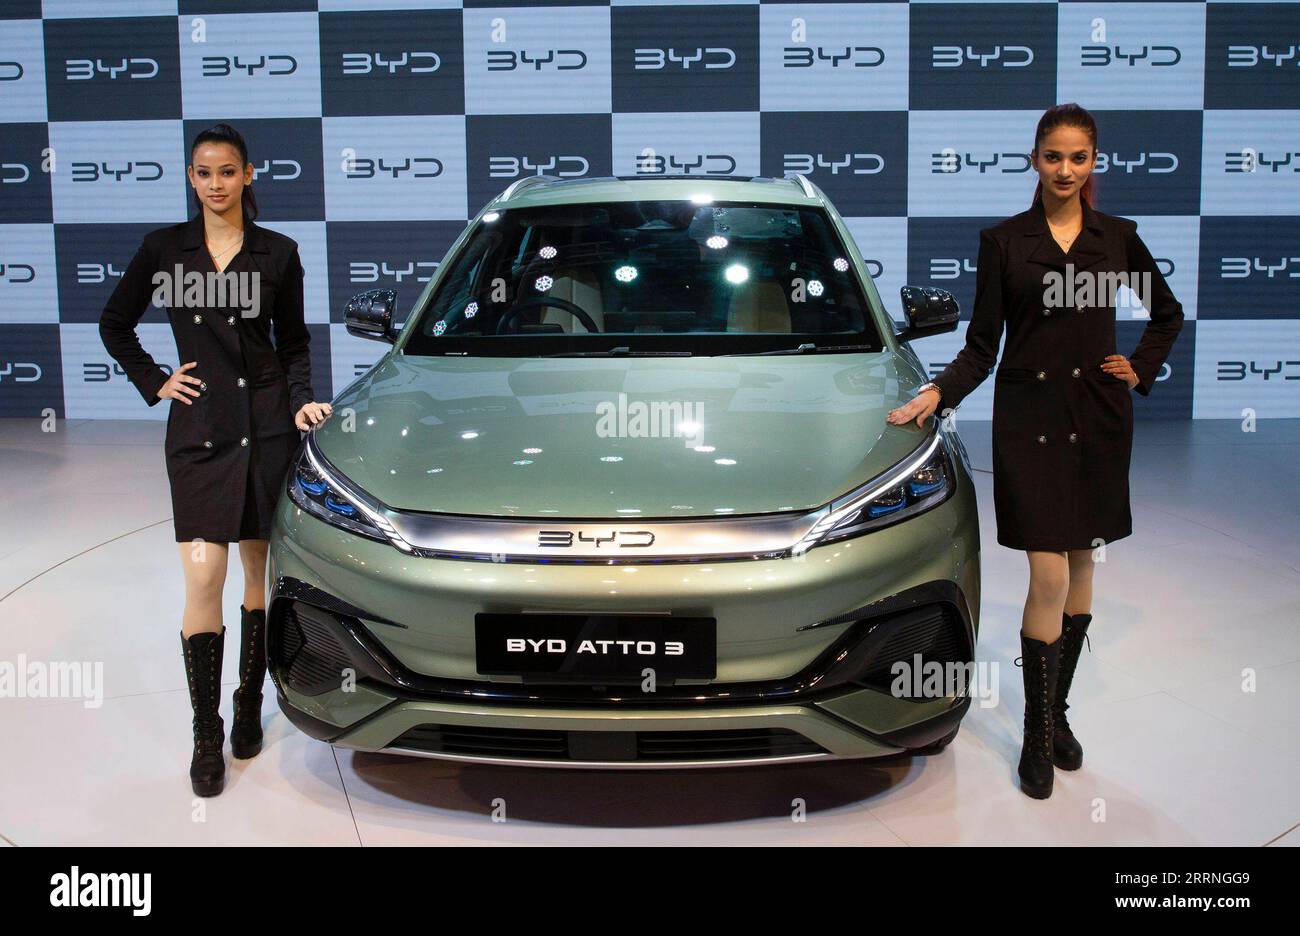 230111 -- NEW DELHI, Jan. 11, 2023 -- Models stand next to a BYD Atto 3 car during the Auto Expo 2023 in the outskirts of New Delhi, India, Jan. 11, 2023.  INDIA-NEW DELHI-AUTO EXPO JavedxDar PUBLICATIONxNOTxINxCHN Stock Photo